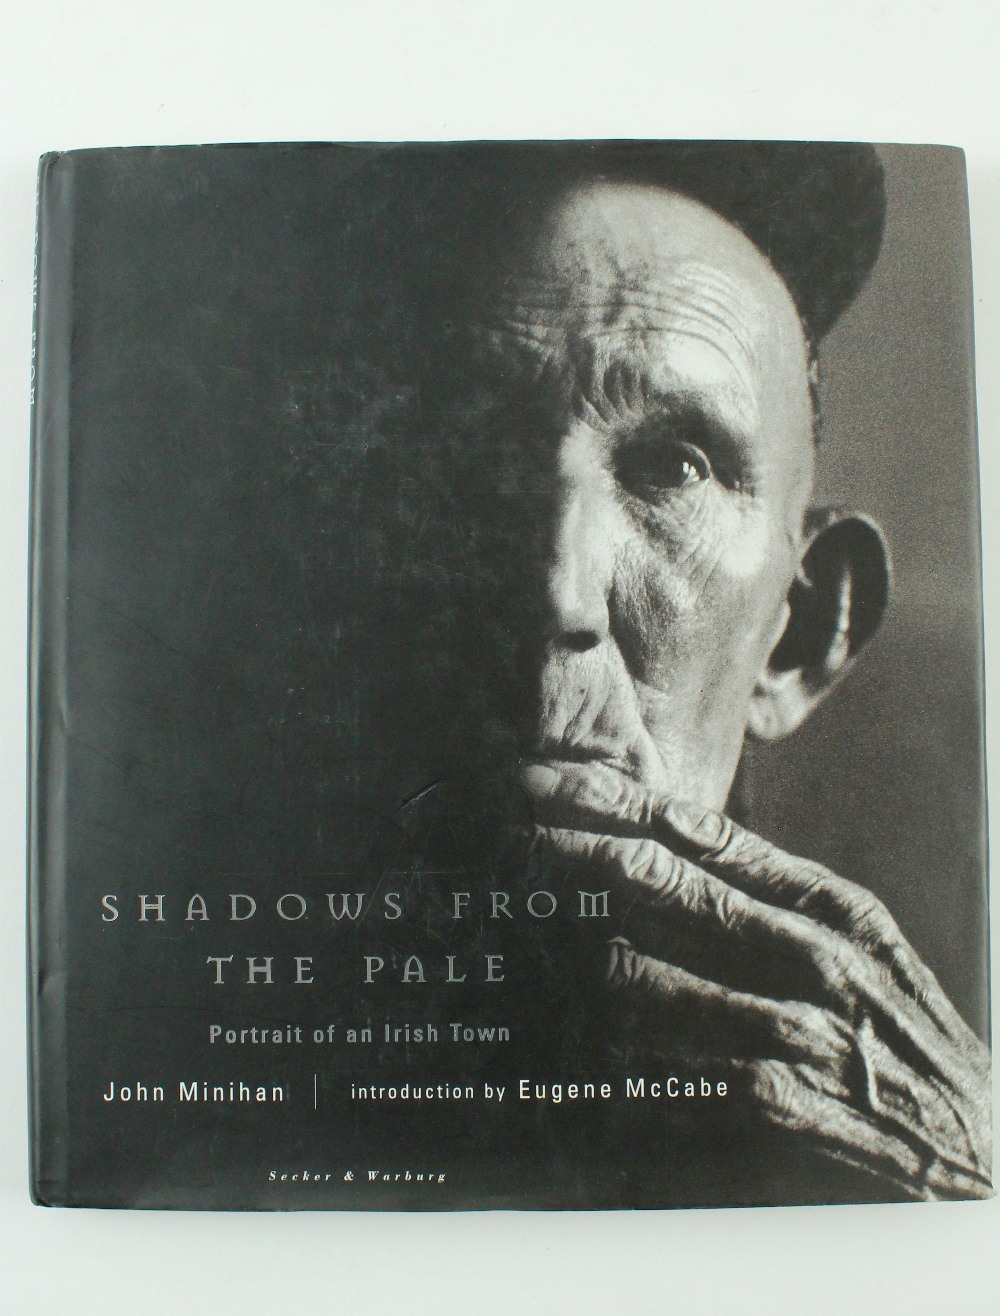 Signed by the ArtistMinihan (John) Shadows from the Pale-Portrait of an Irish Town [Athy], Lg. 4to